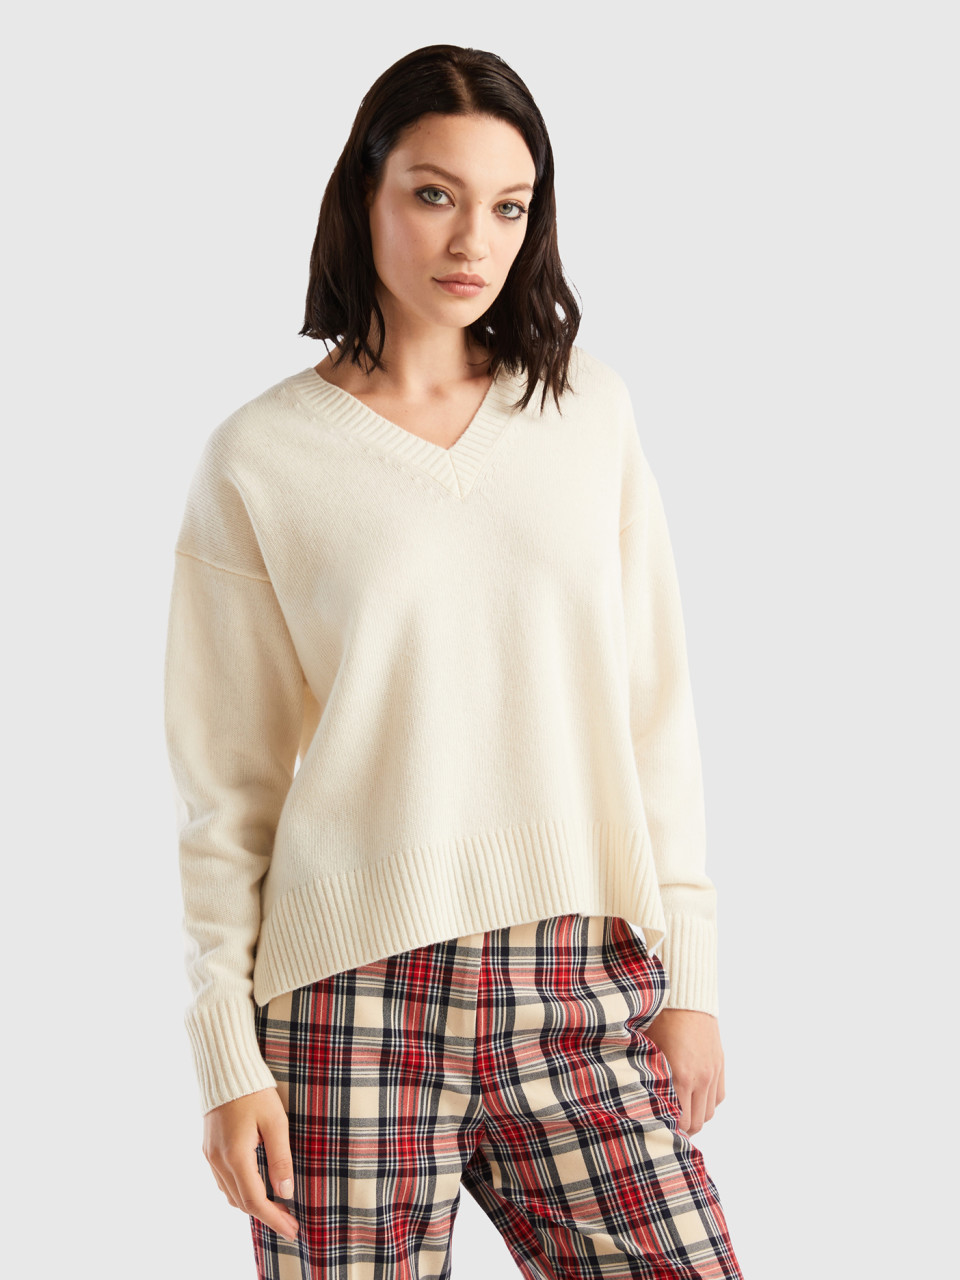 Benetton, Oversized Fit Sweater With Slits, Creamy White, Women